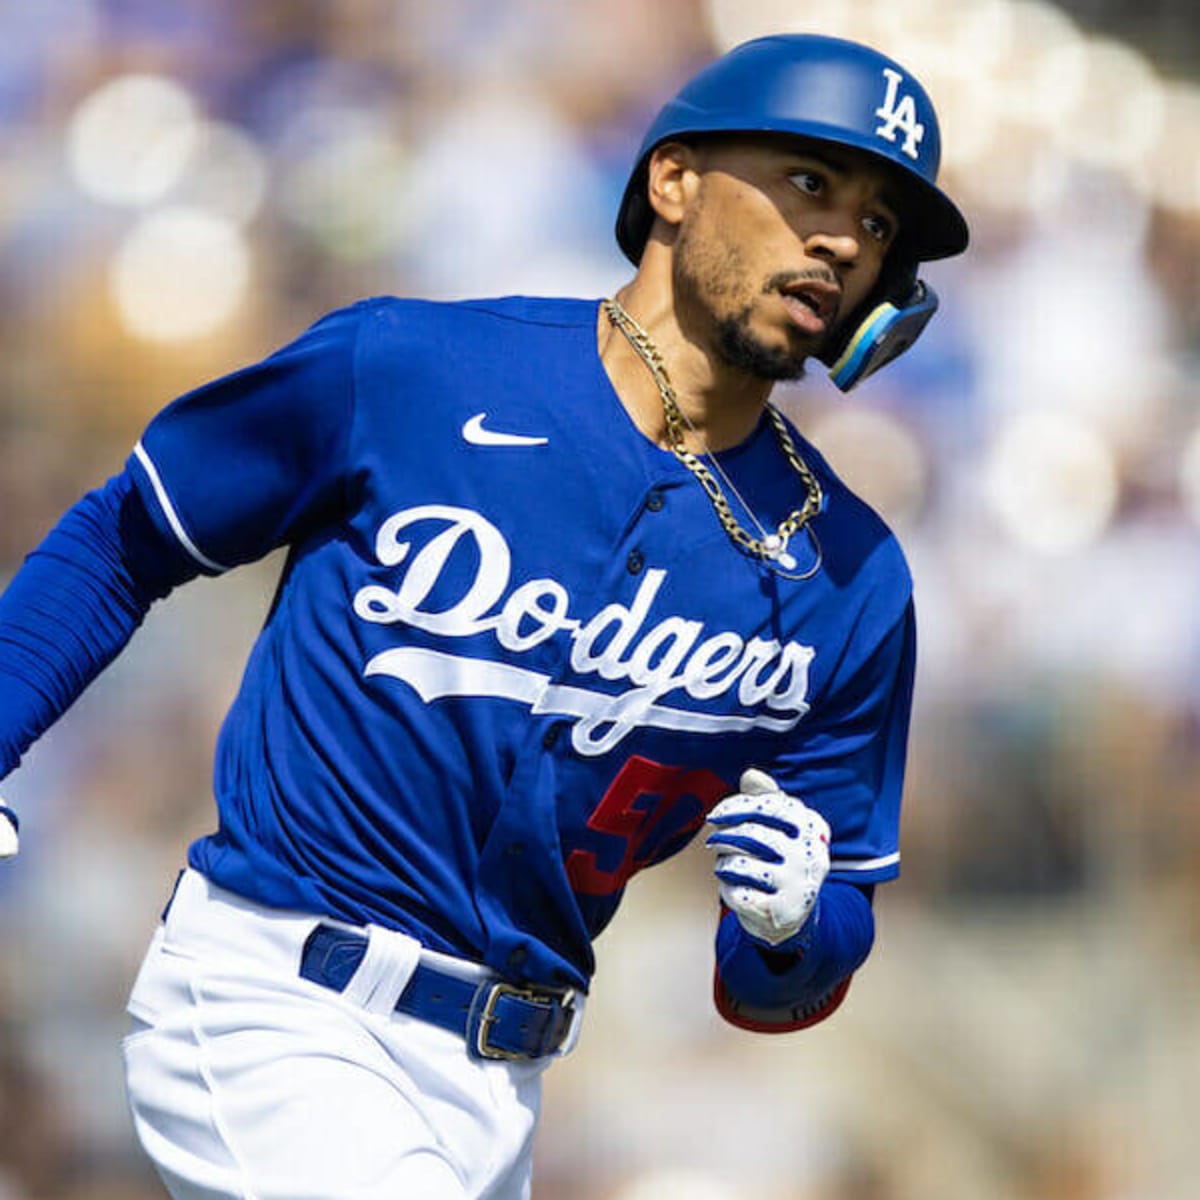 Spring Training Preview: Julio Urías Makes Final Tuneup Before Opening Day;  Mookie Betts Returns To Dodgers Lineup Vs. Brewers